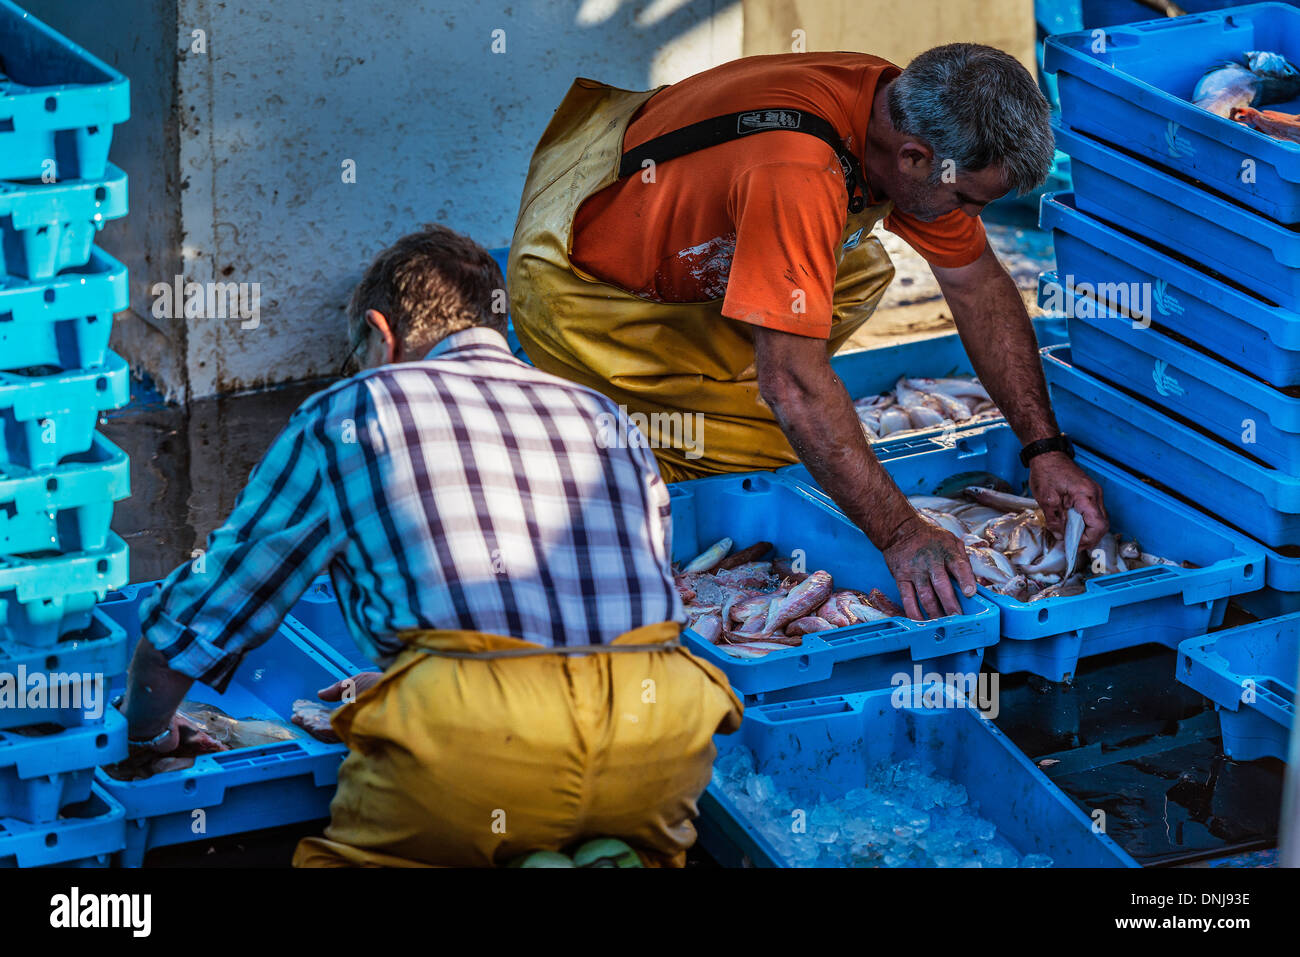 Fisherman sort their catch for market, Palamos, Spain Stock Photo